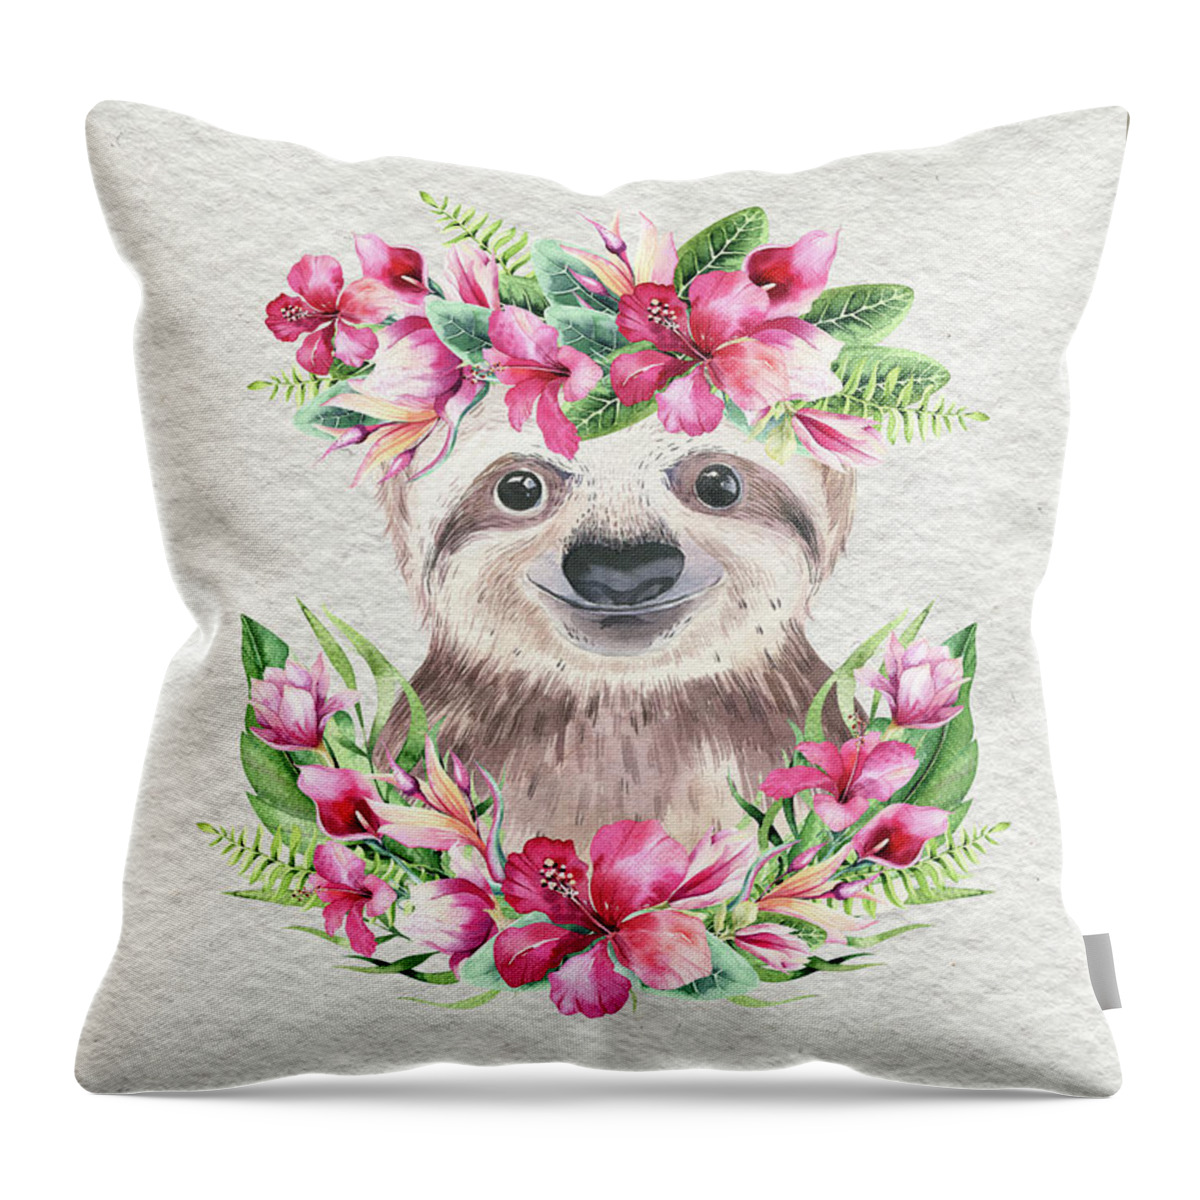 Sloth With Flowers Throw Pillow featuring the painting Sloth With Flowers by Nursery Art